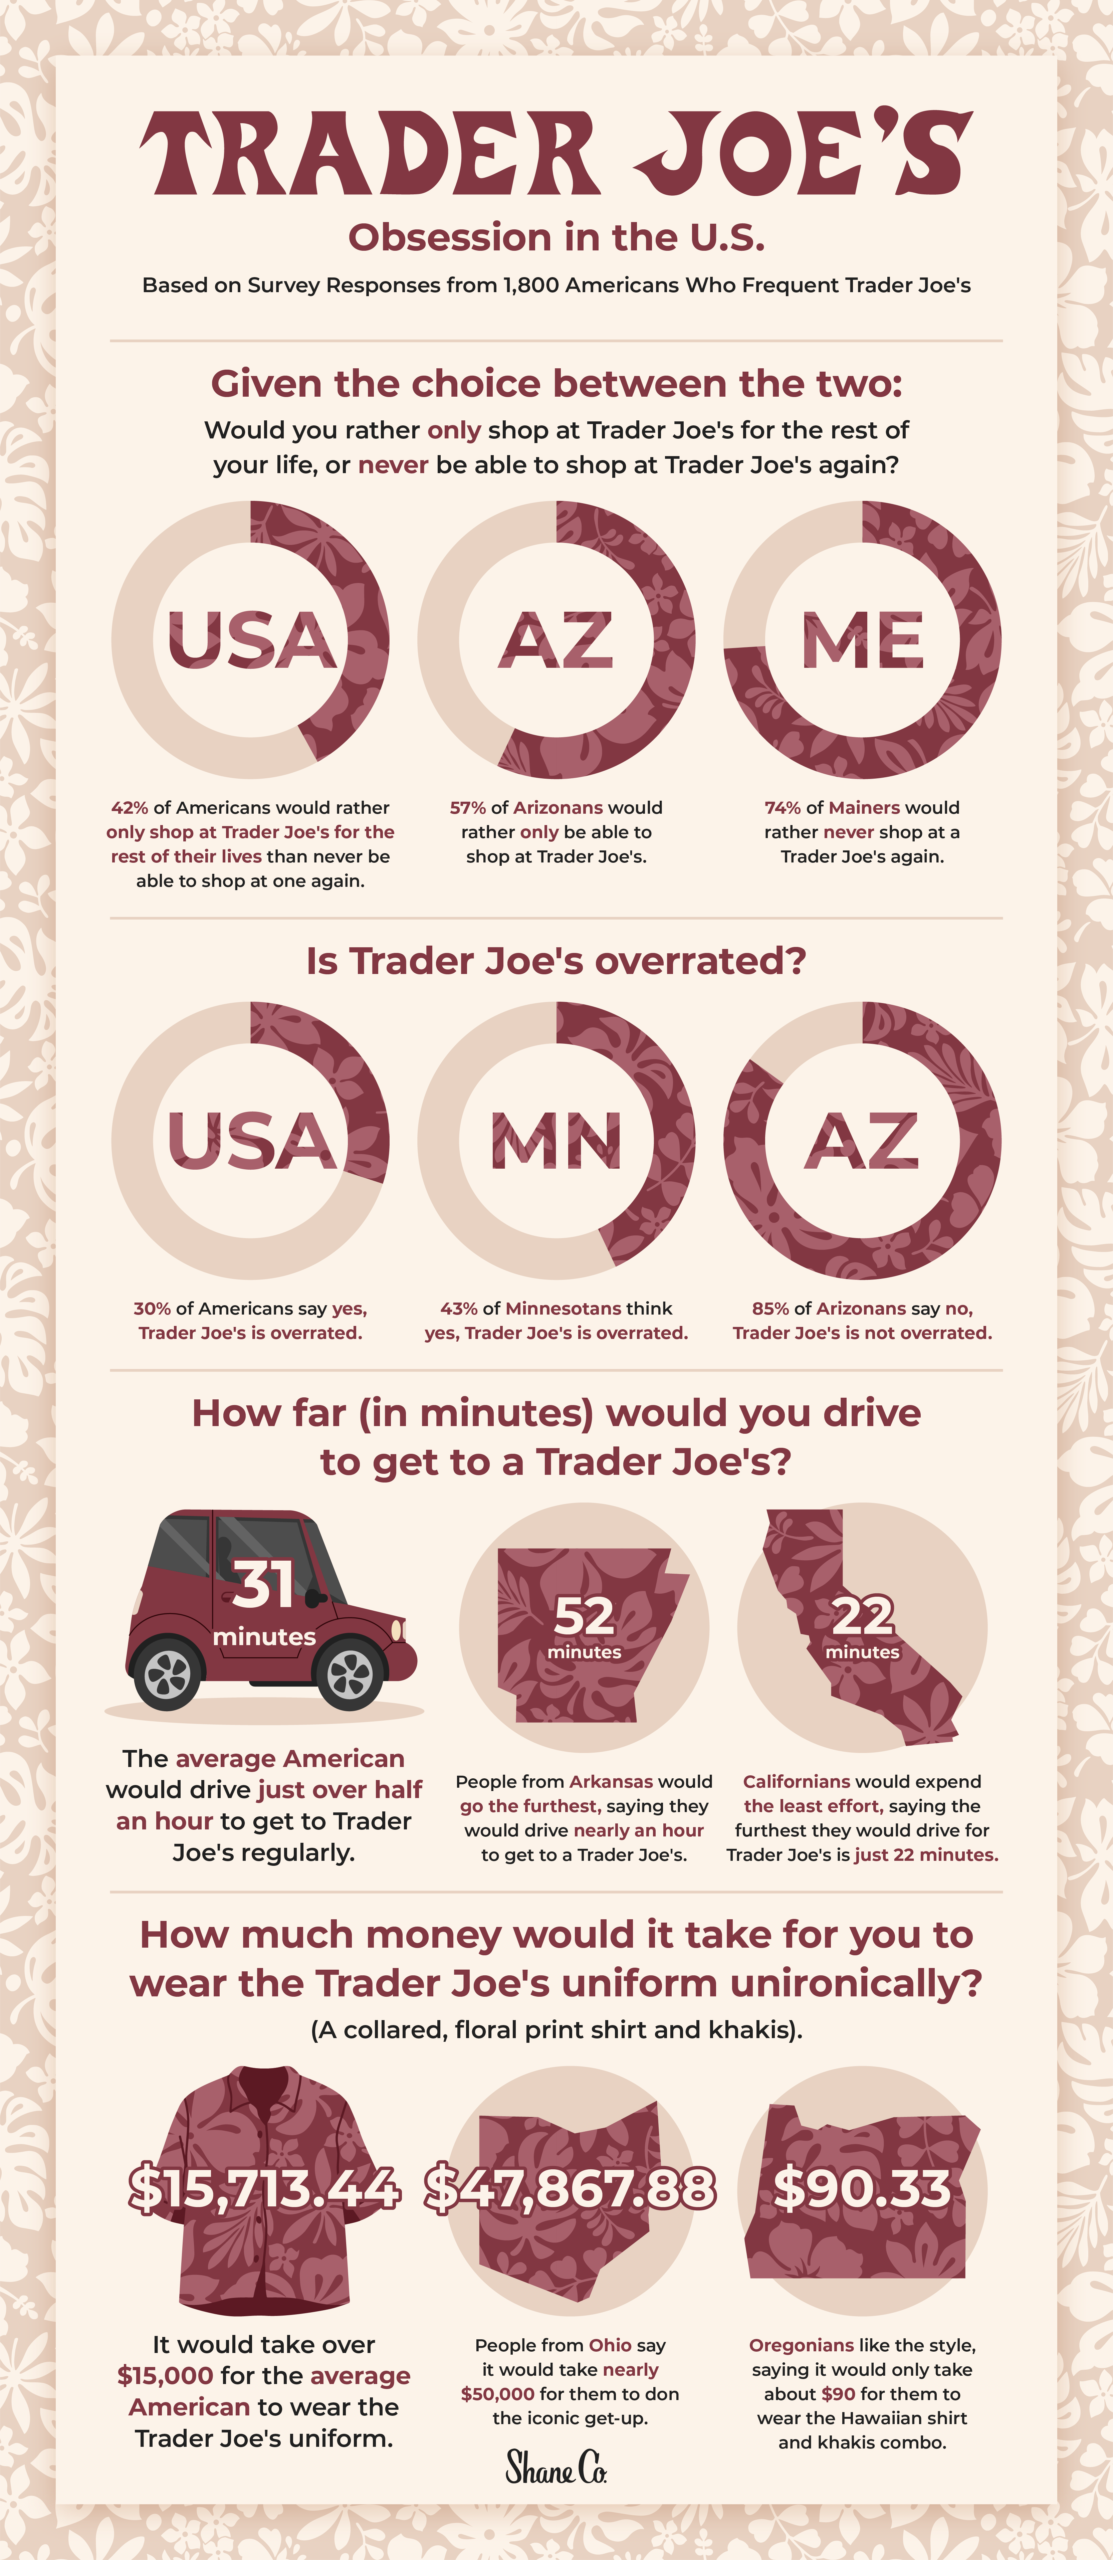 A graphic illustrating Trader Joe’s obsession in the U.S.